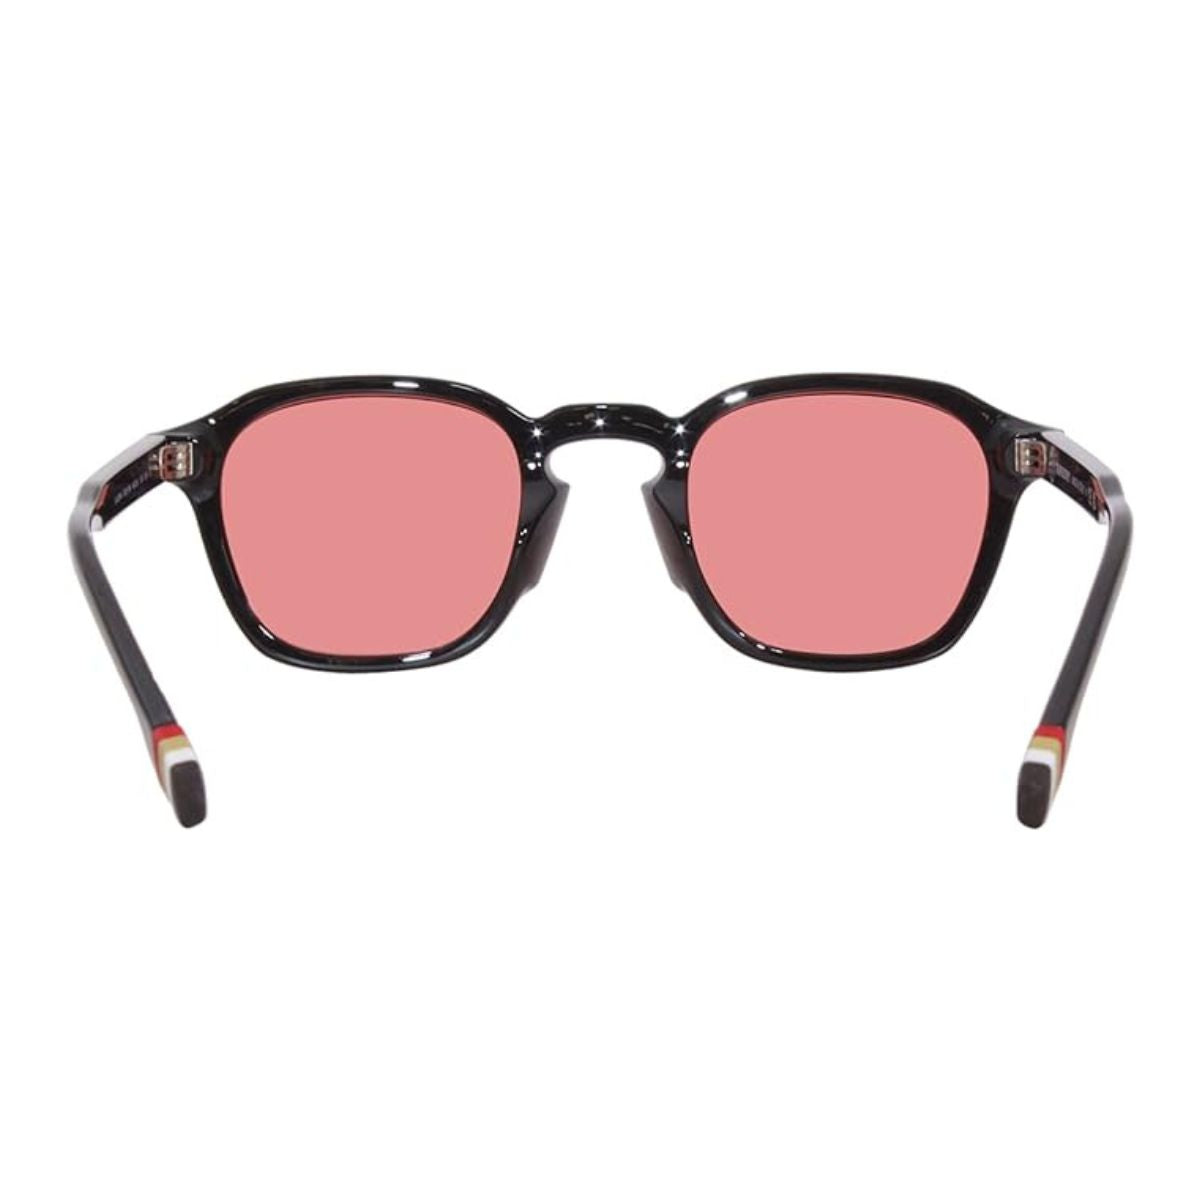 "Burberry 4378-U unisex sunglasses laid on a rustic wooden surface, emphasizing the elegant design and color contrast, ready for any fashion enthusiast."